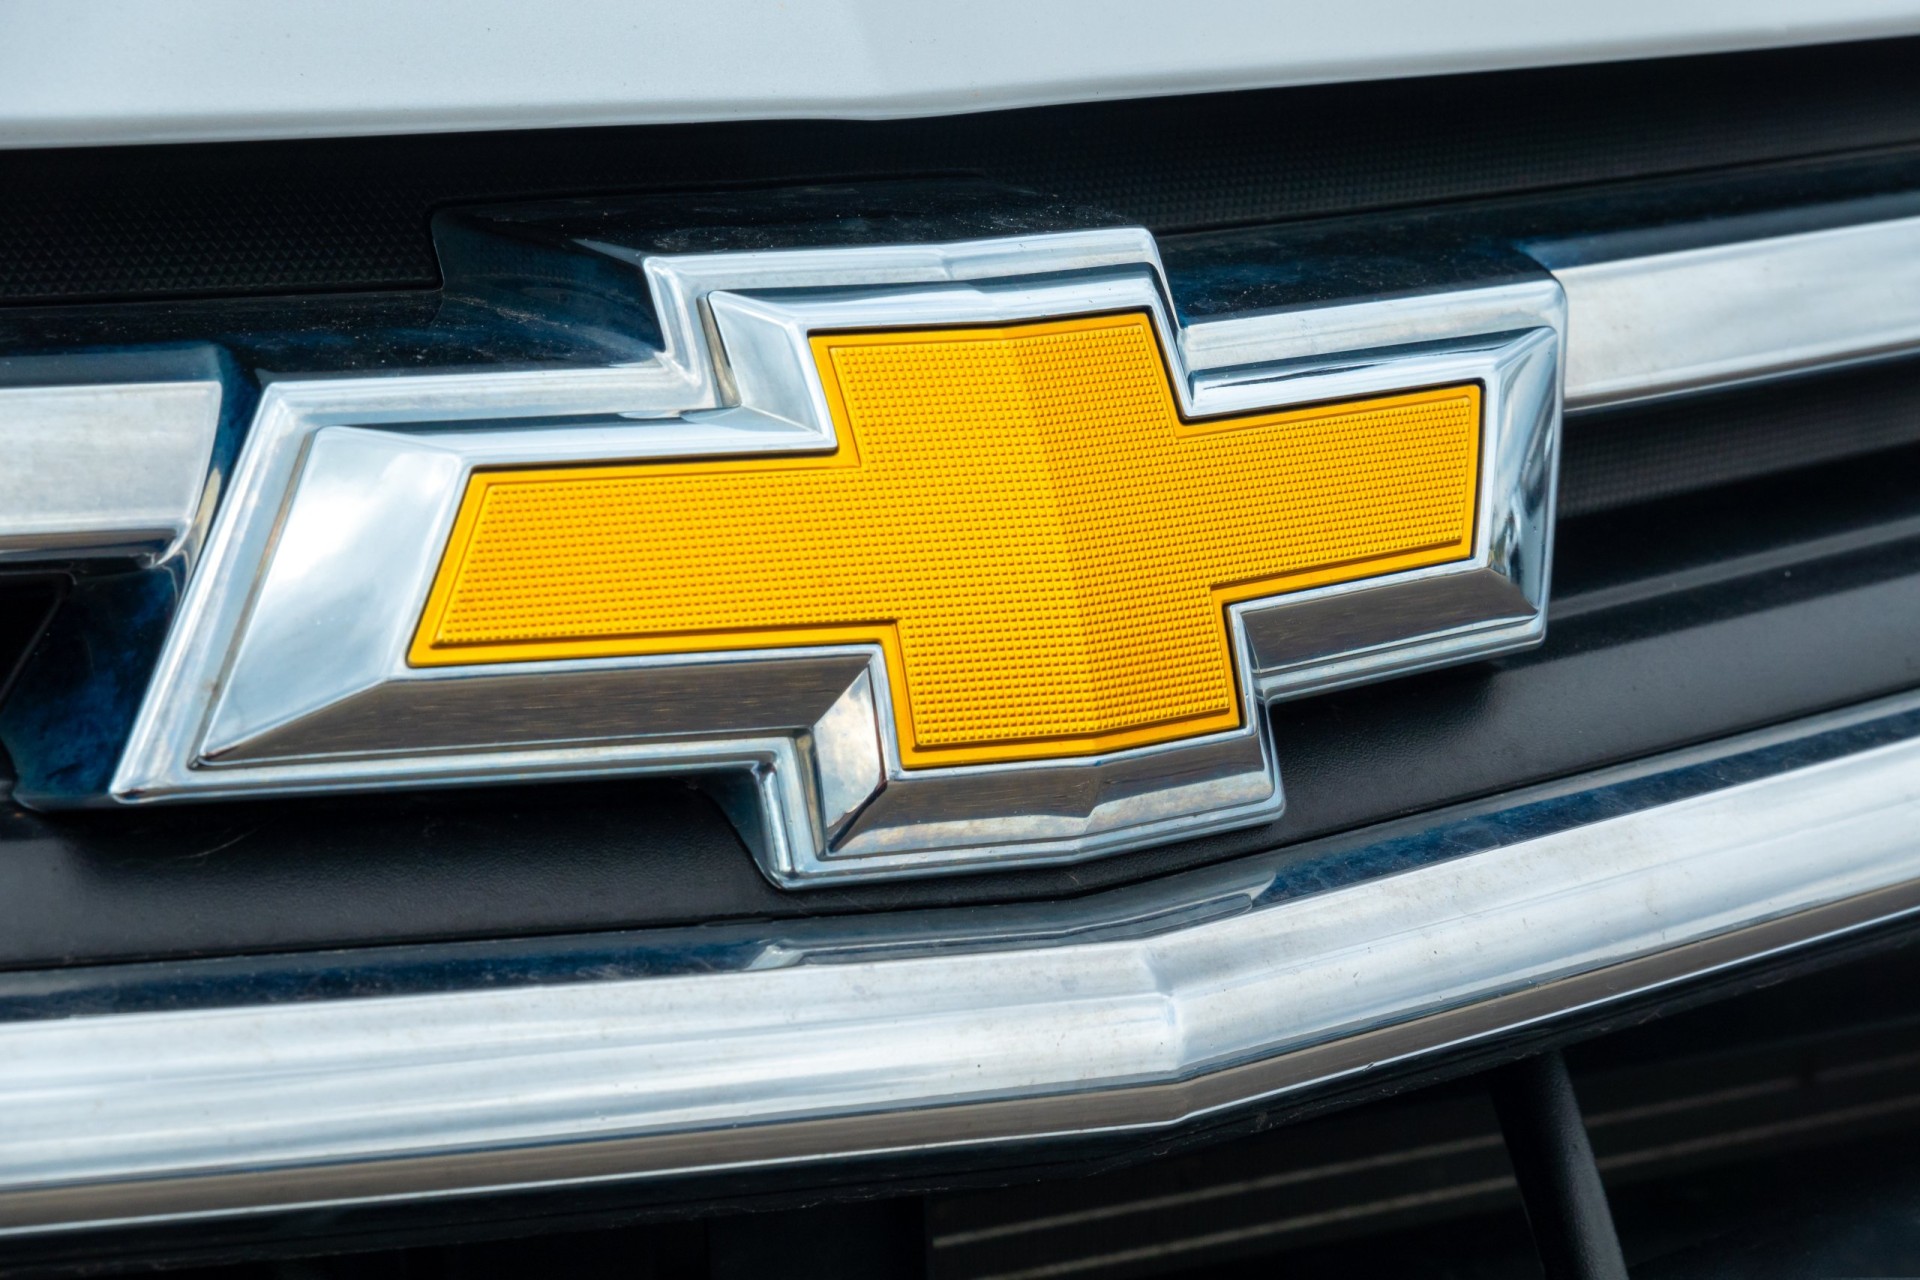 Chevrolet auto grill close-up and trademark logo.